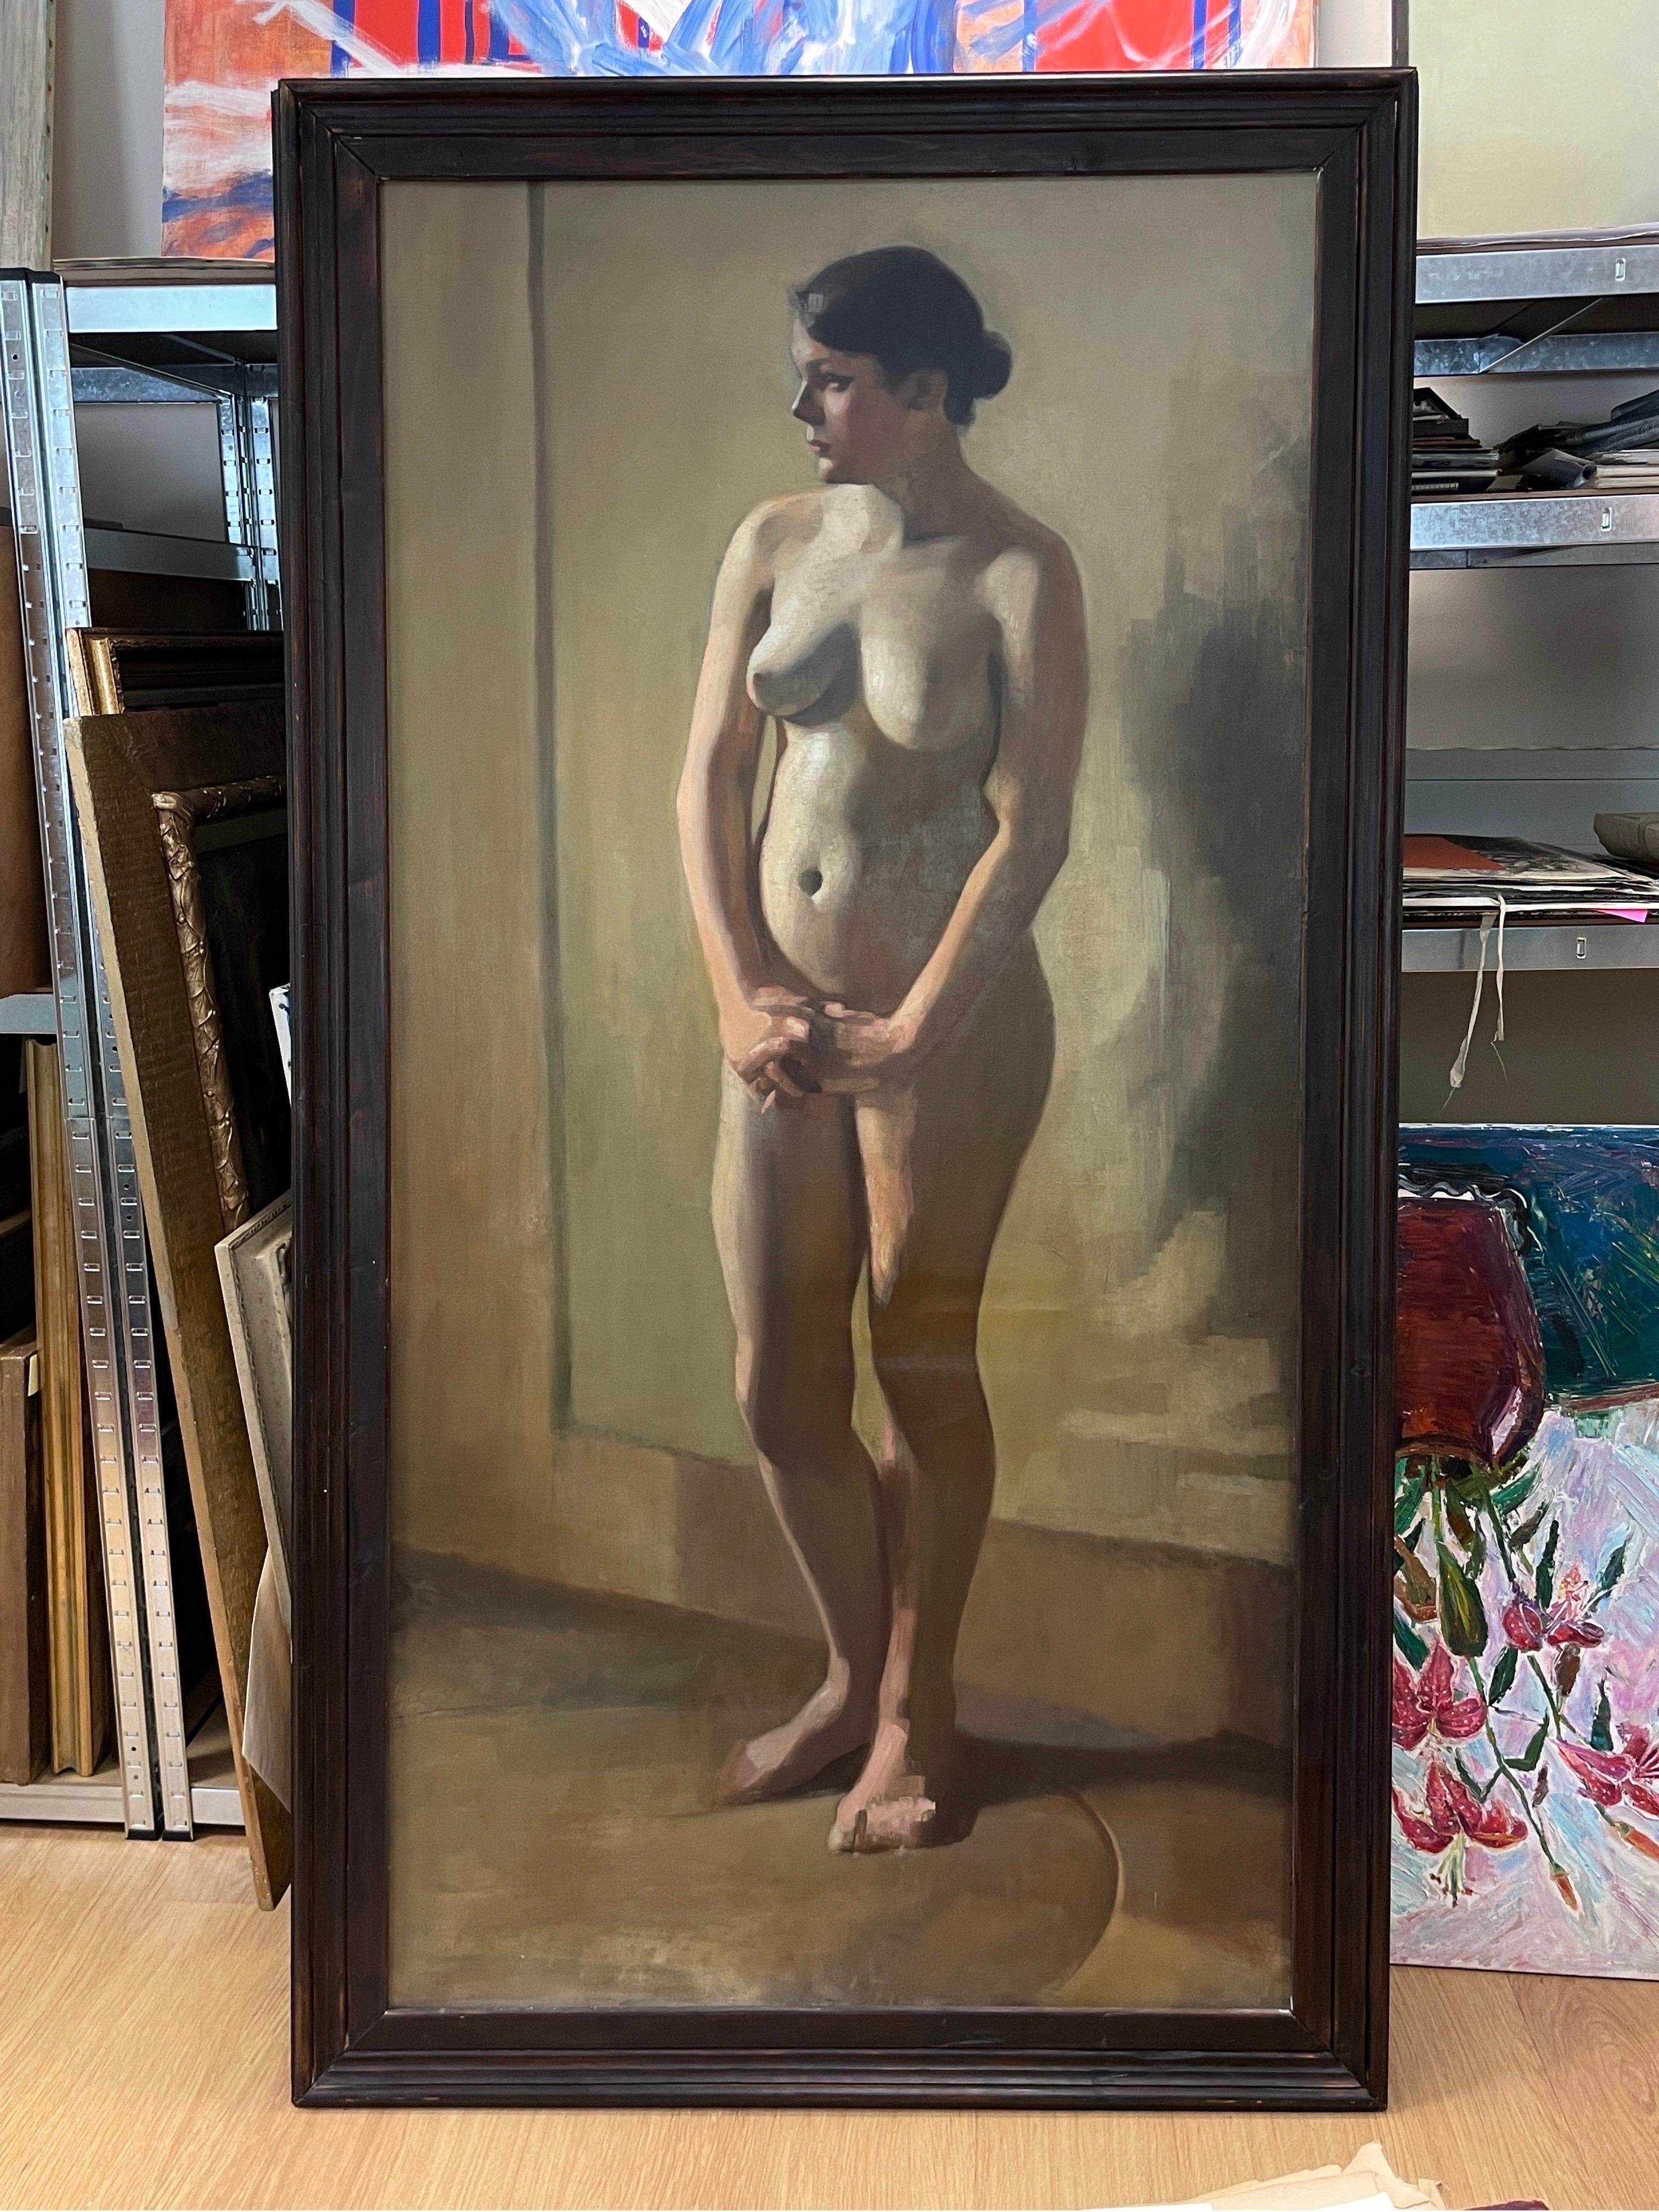 Enormous 1900's Dutch Impressionist Oil Female Nude Portrait, Full Length Nude  - Post-Impressionist Painting by Early 20thC Dutch